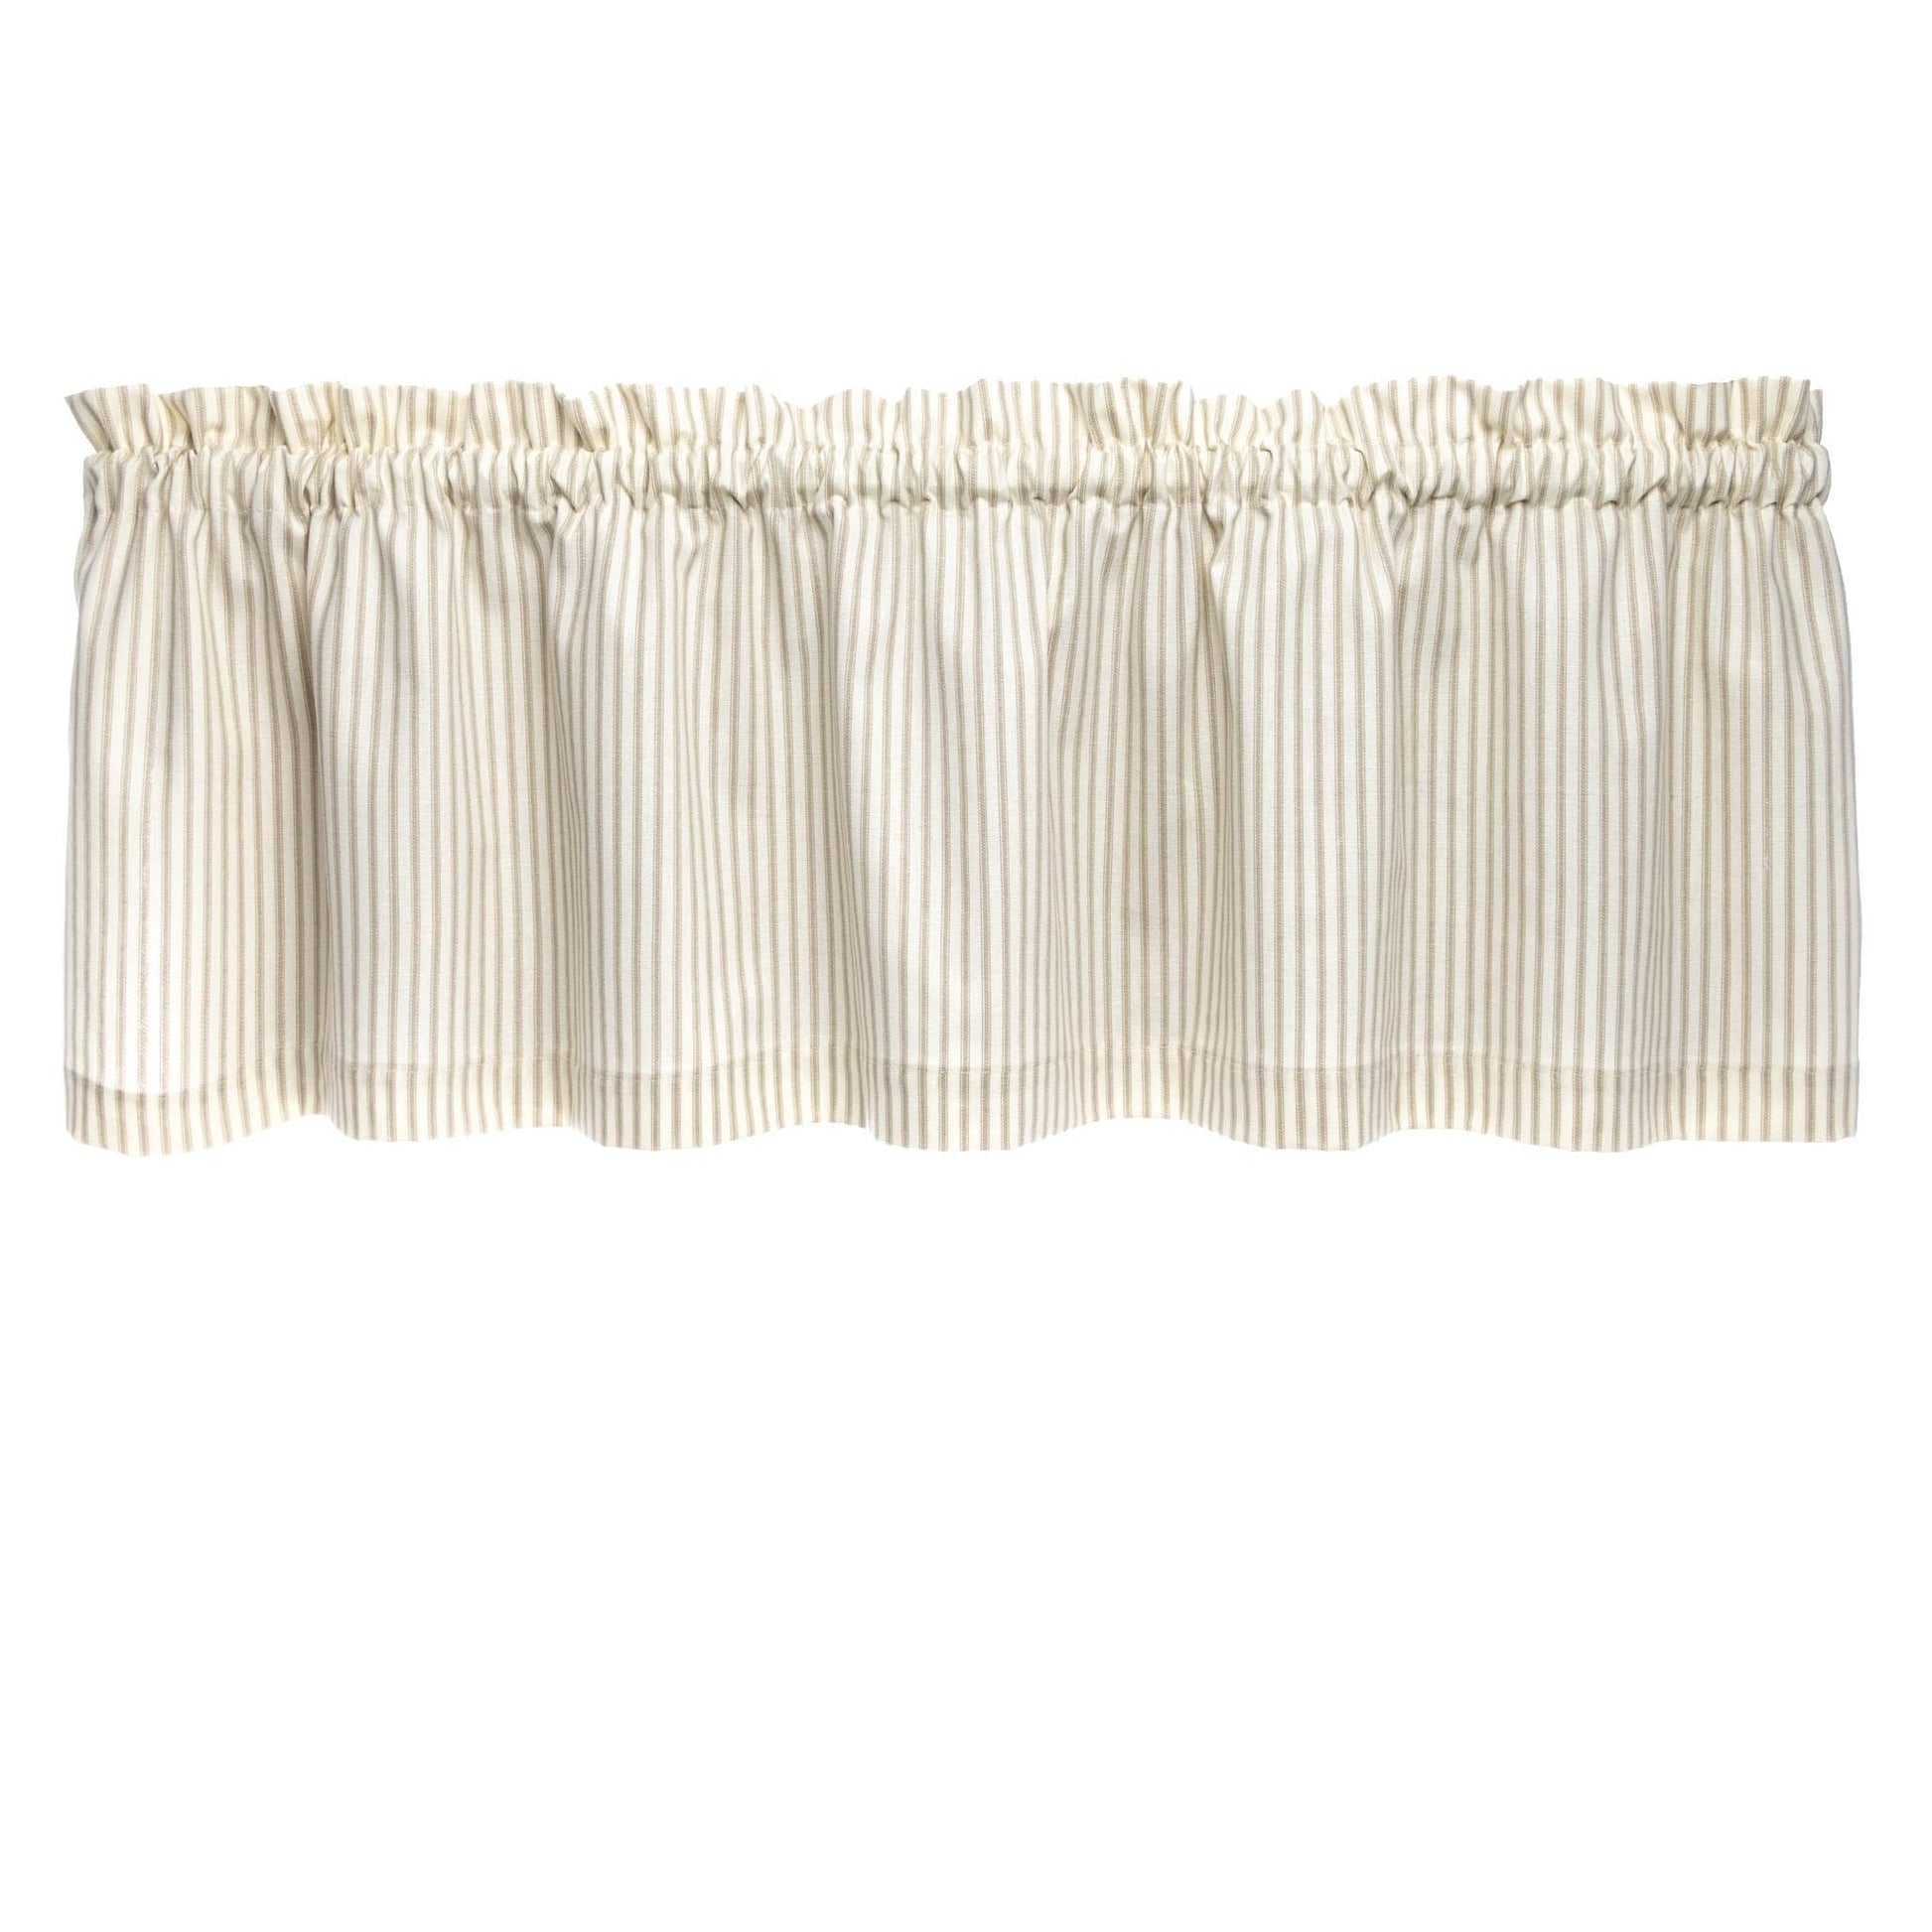 Ticking Stripe Natural Cafe Valance - Straight Tailored Window Treatment